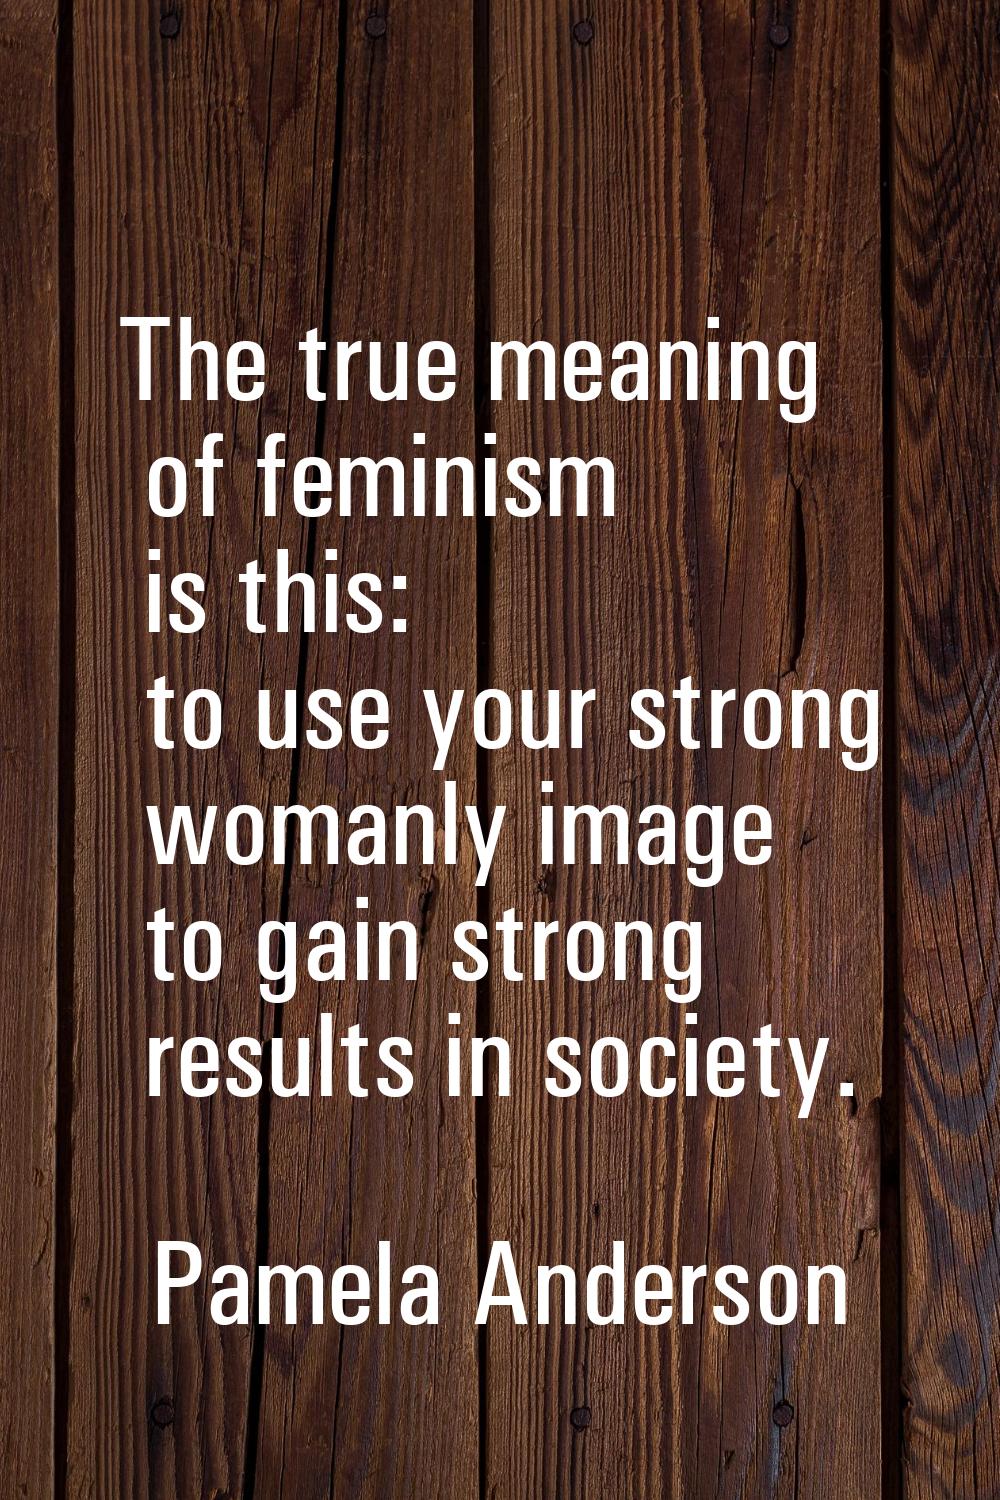 The true meaning of feminism is this: to use your strong womanly image to gain strong results in so